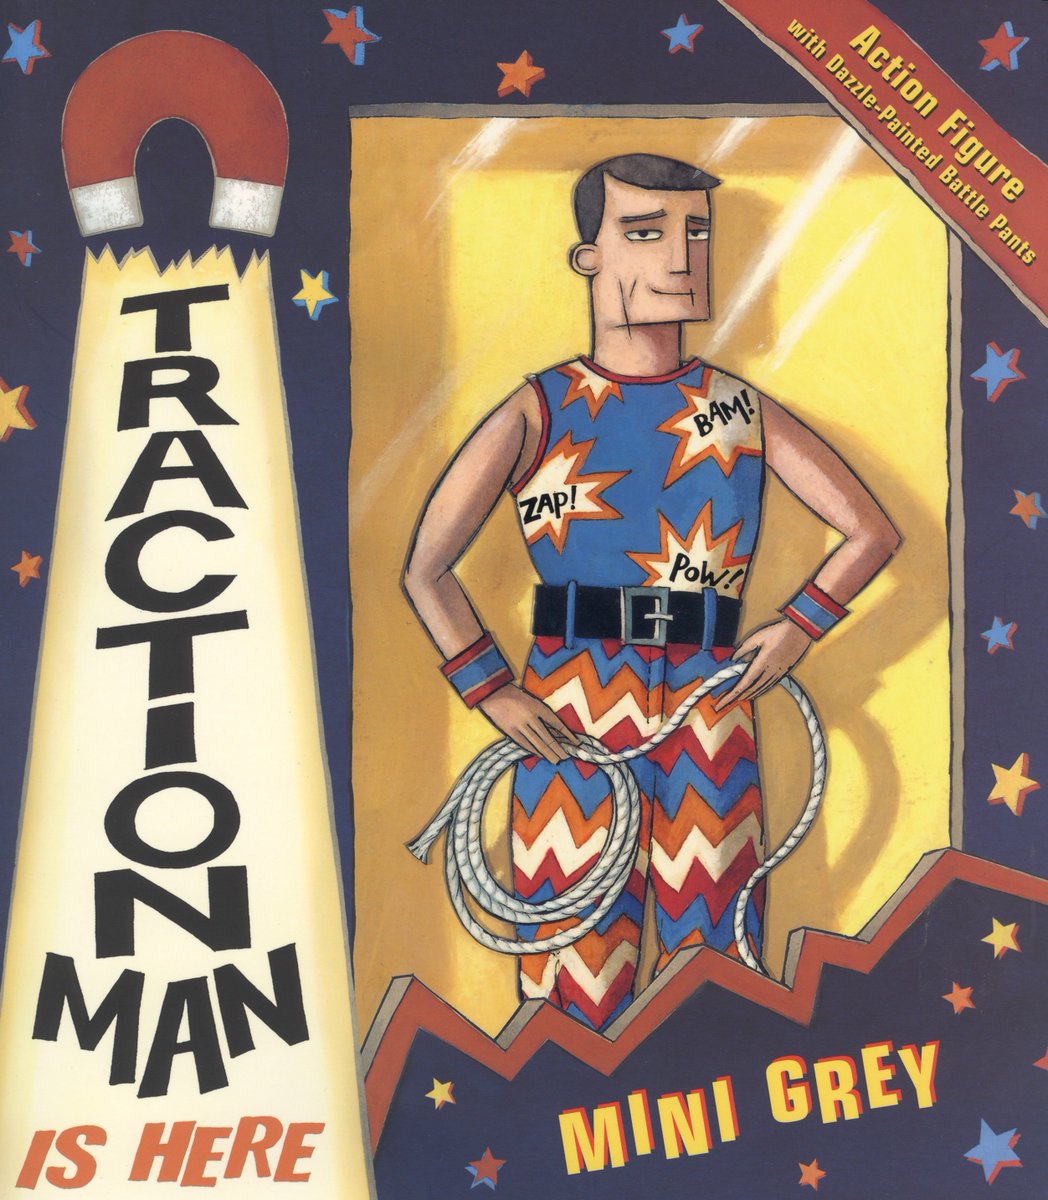 Complete change of direction today, we went for Traction Man Is Here by Mini Grey  @Bonzetta1 as our  #PicturebookADay. One of my absolute favourites to read aloud, full of great jokes and opportunities for melodramatic voices. Oh, and we made it past Wednesday.